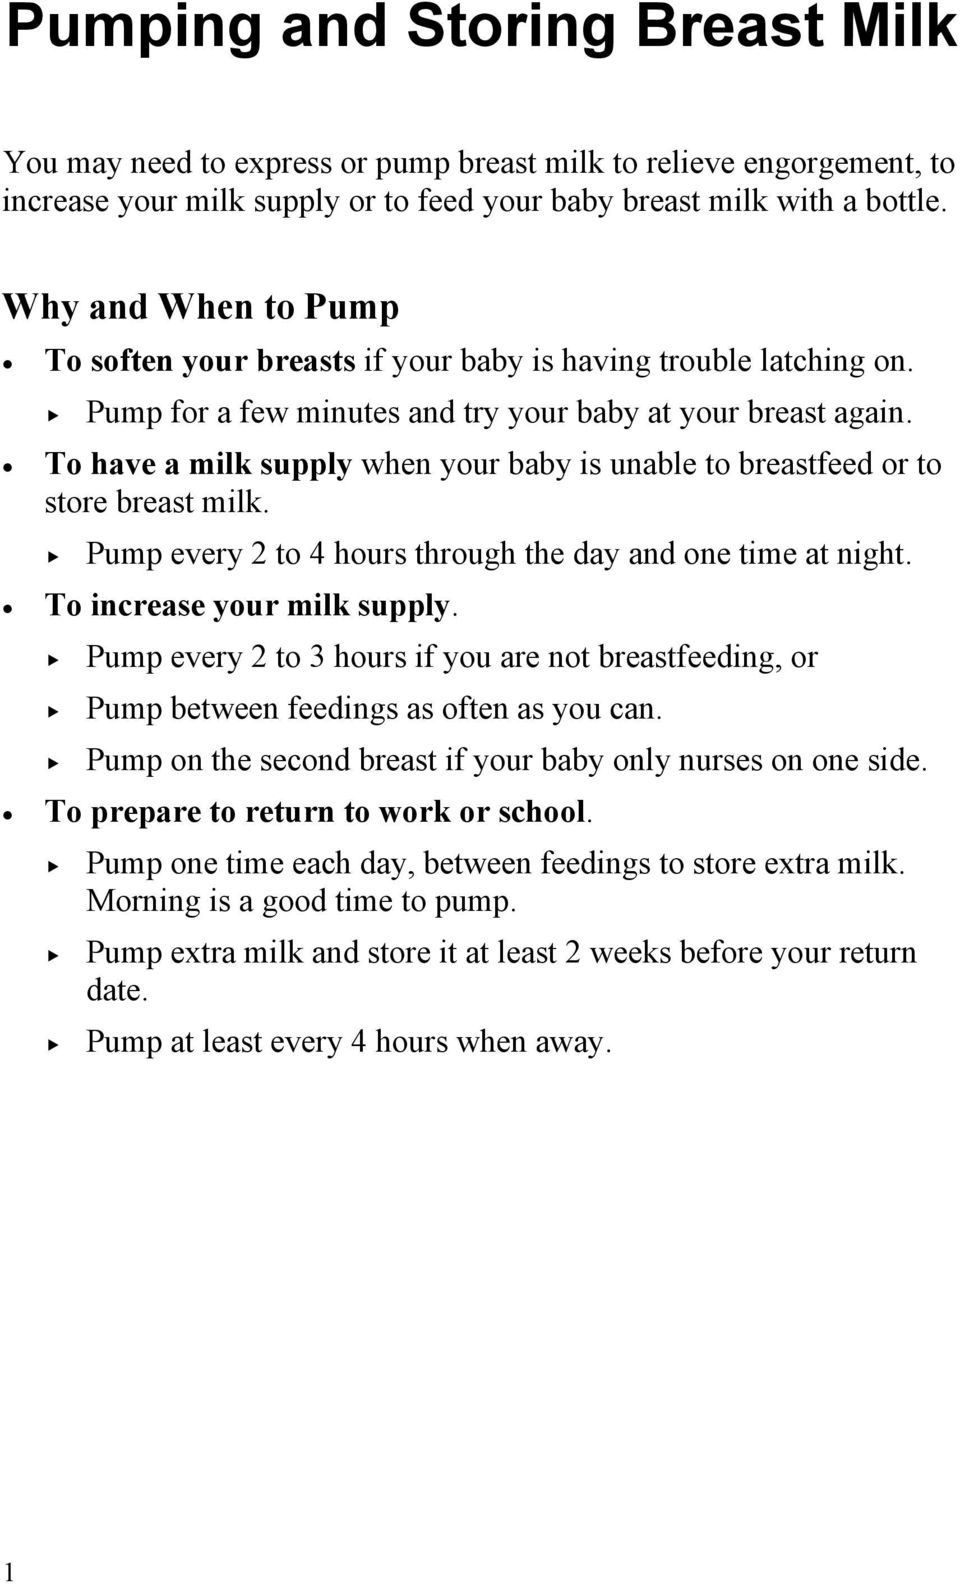 To have a milk supply when your baby is unable to breastfeed or to store breast milk. Pump every 2 to 4 hours through the day and one time at night. To increase your milk supply.